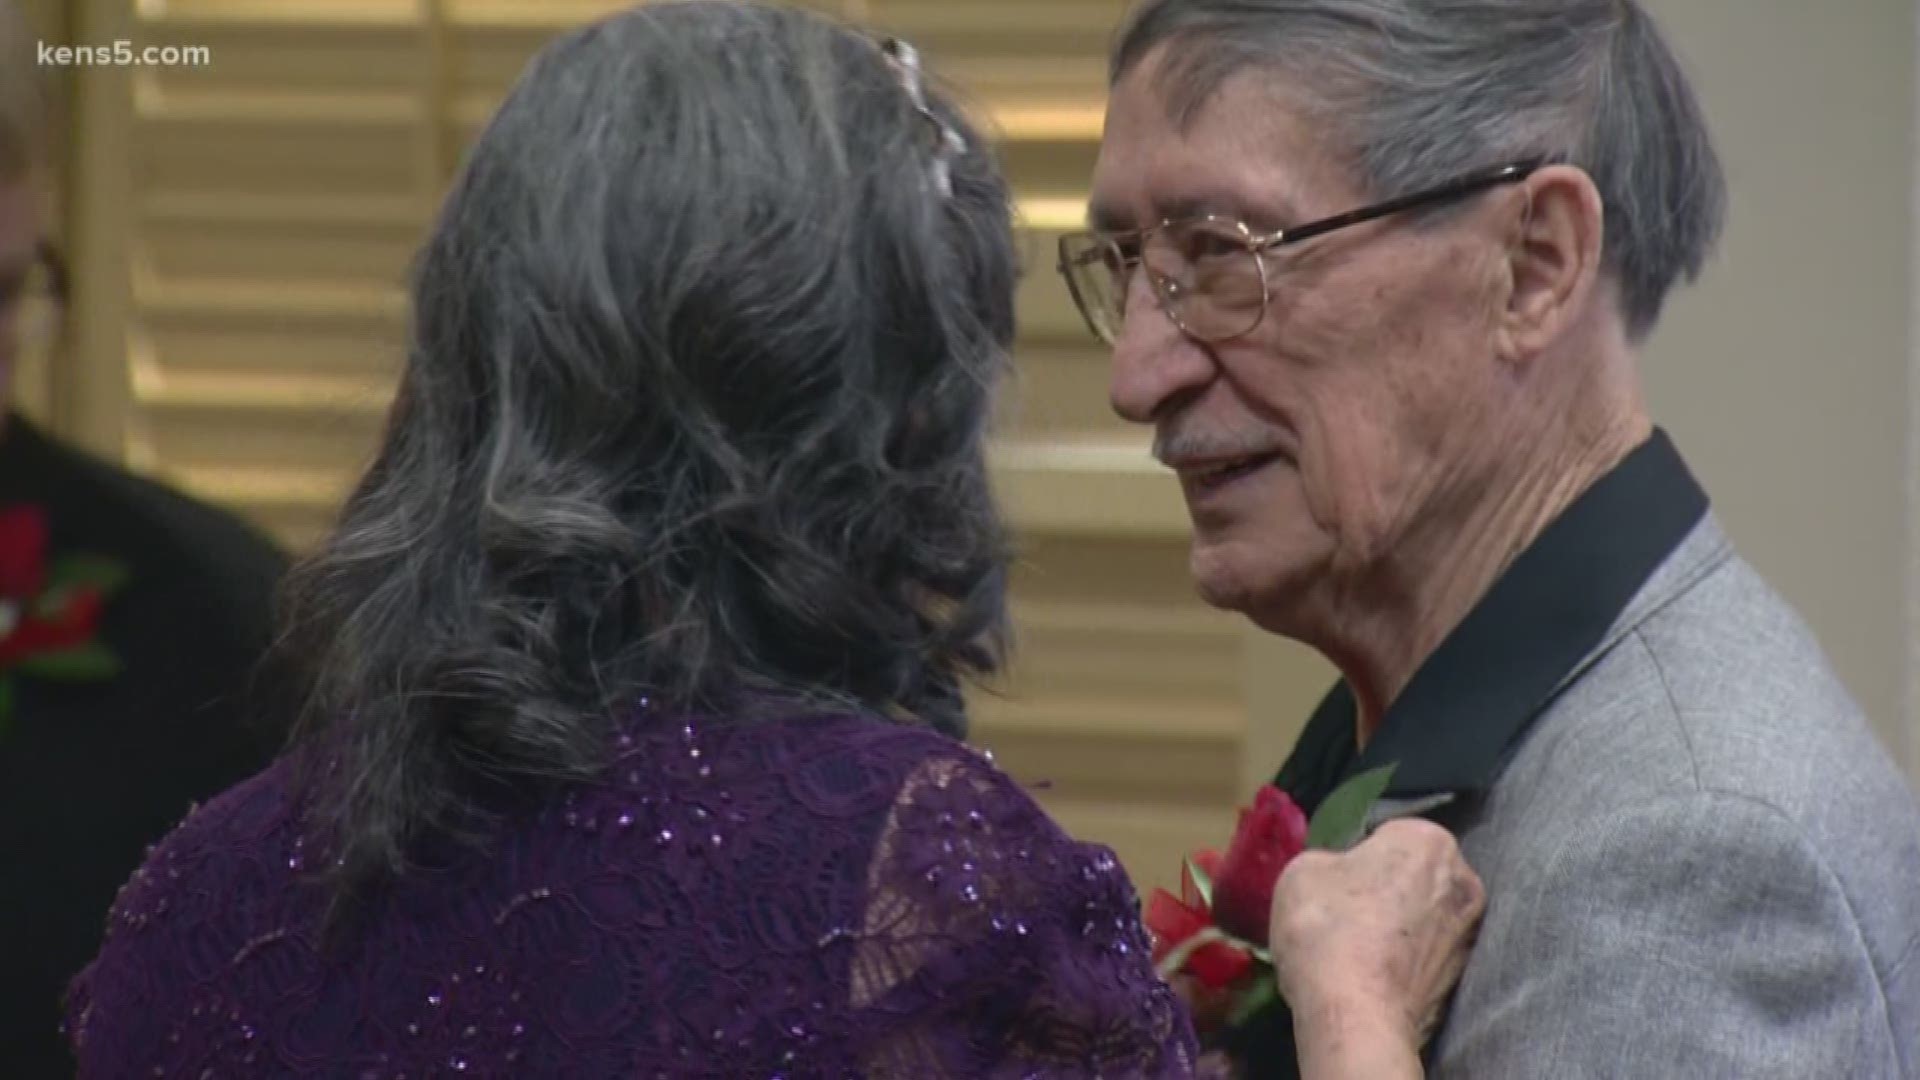 There was a special wedding Saturday at the Holiday Retirements Madison Estates.  83 year old Janice and 89 year old Cardy tied the knot today. Eyewitness news photojournalist Adam Pyle caught up with the couple on their special day.